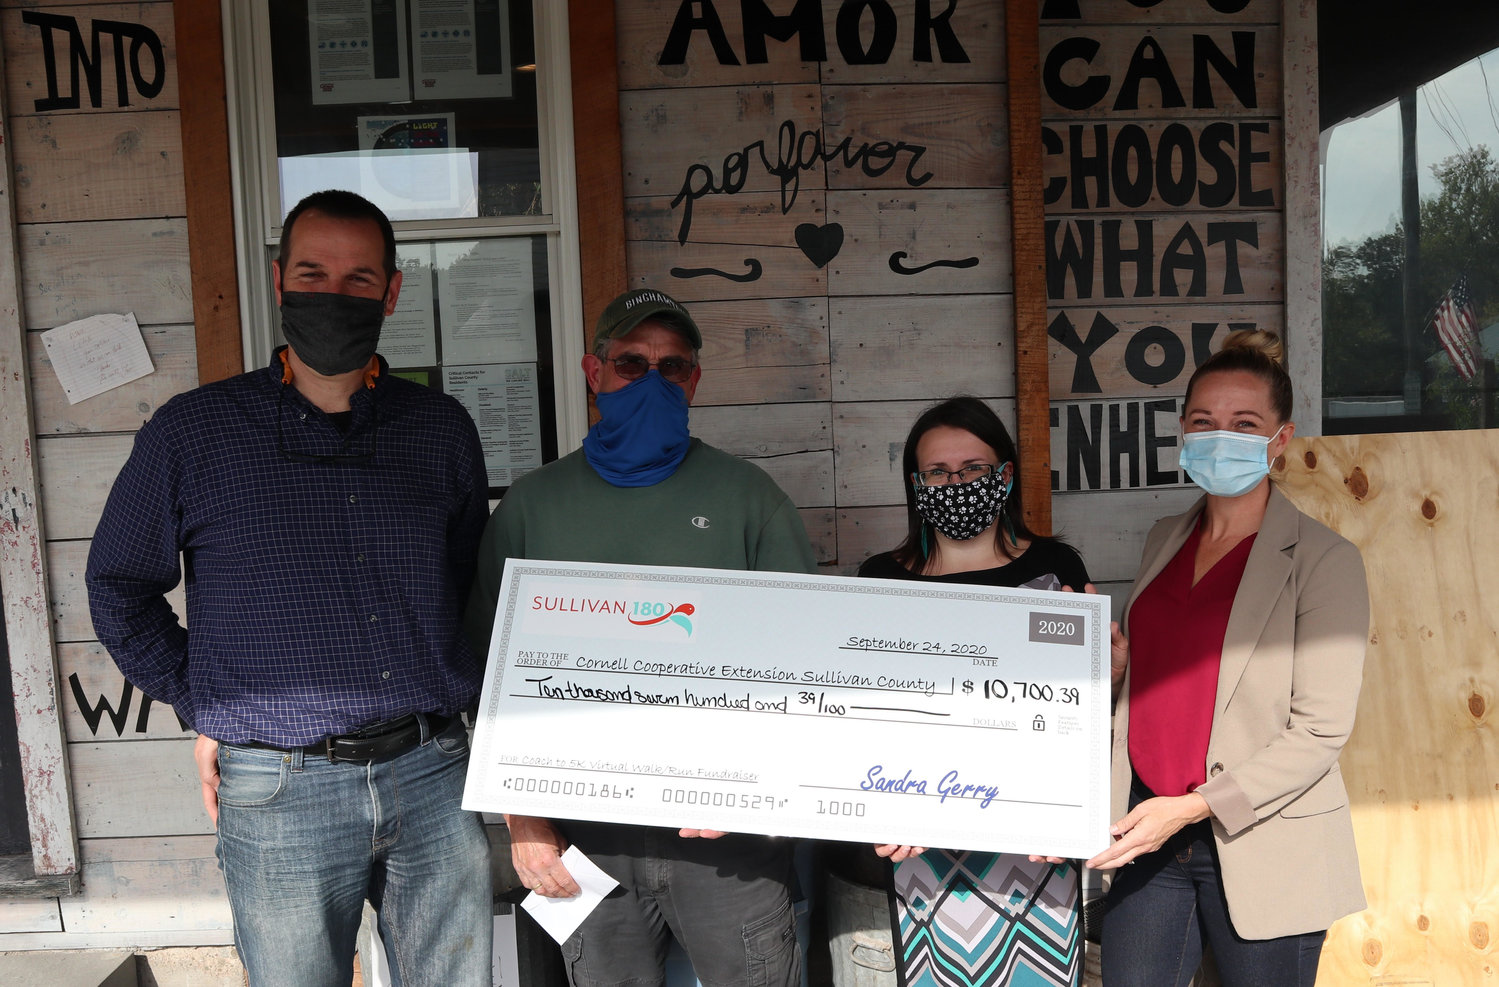 Thomas Bosket, left, Martin Colavito, Jenny Sanchez and Meaghan Mullally-Gorr pose with a check for $10,700 for Sullivan Allies Leading Together (SALT). The money was brought in by a fundraiser organized by Sullivan 180.